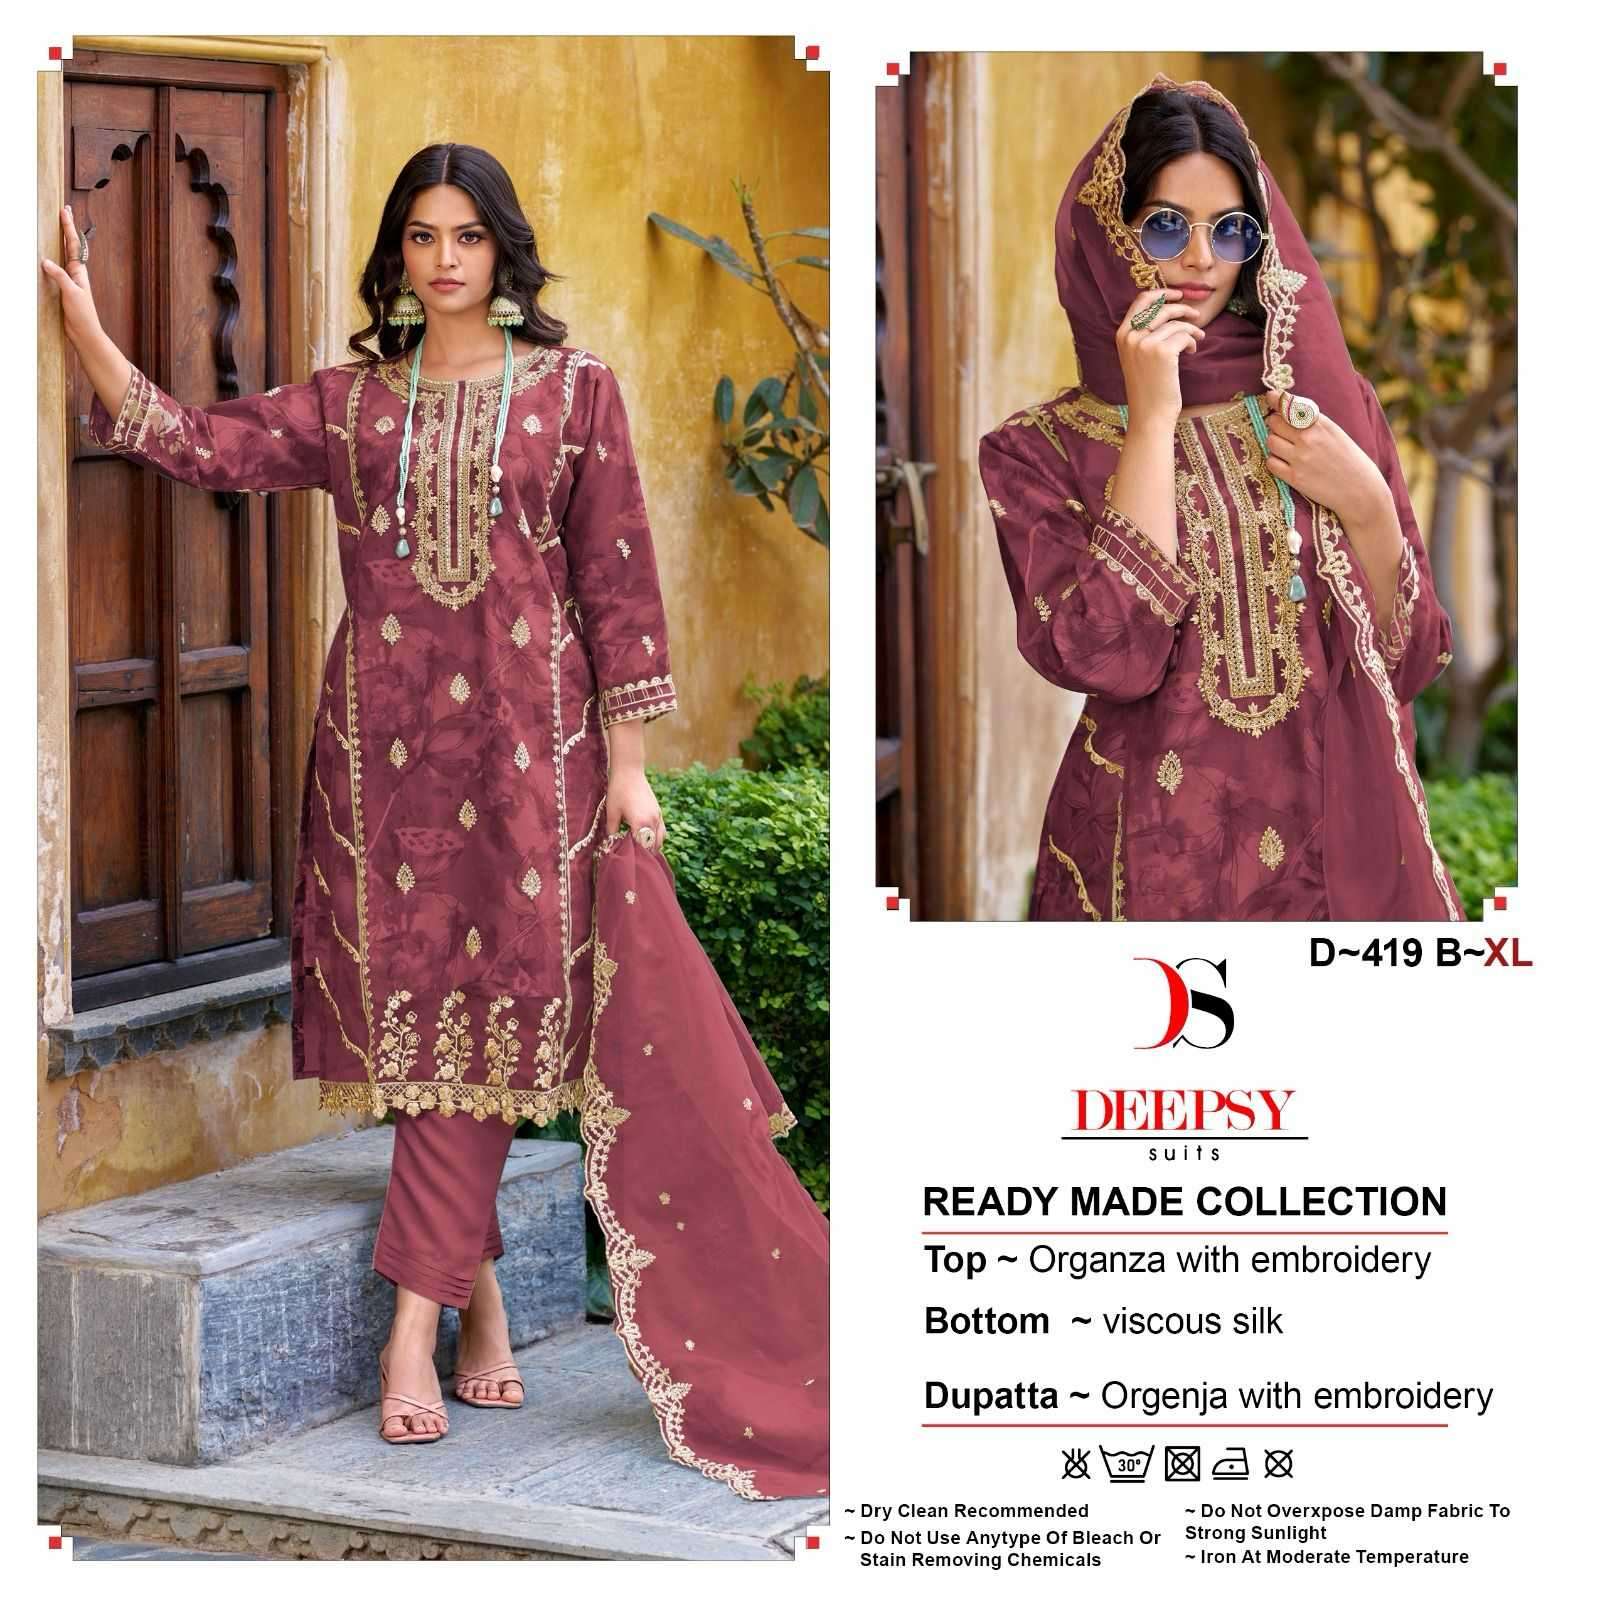 DEEPSY 419 DESIGNER WITH WORK ORGANZA READYMADE PAKISTANI STYLE SUITS ARE AVAILABLE AT WHOLESALE PRICE